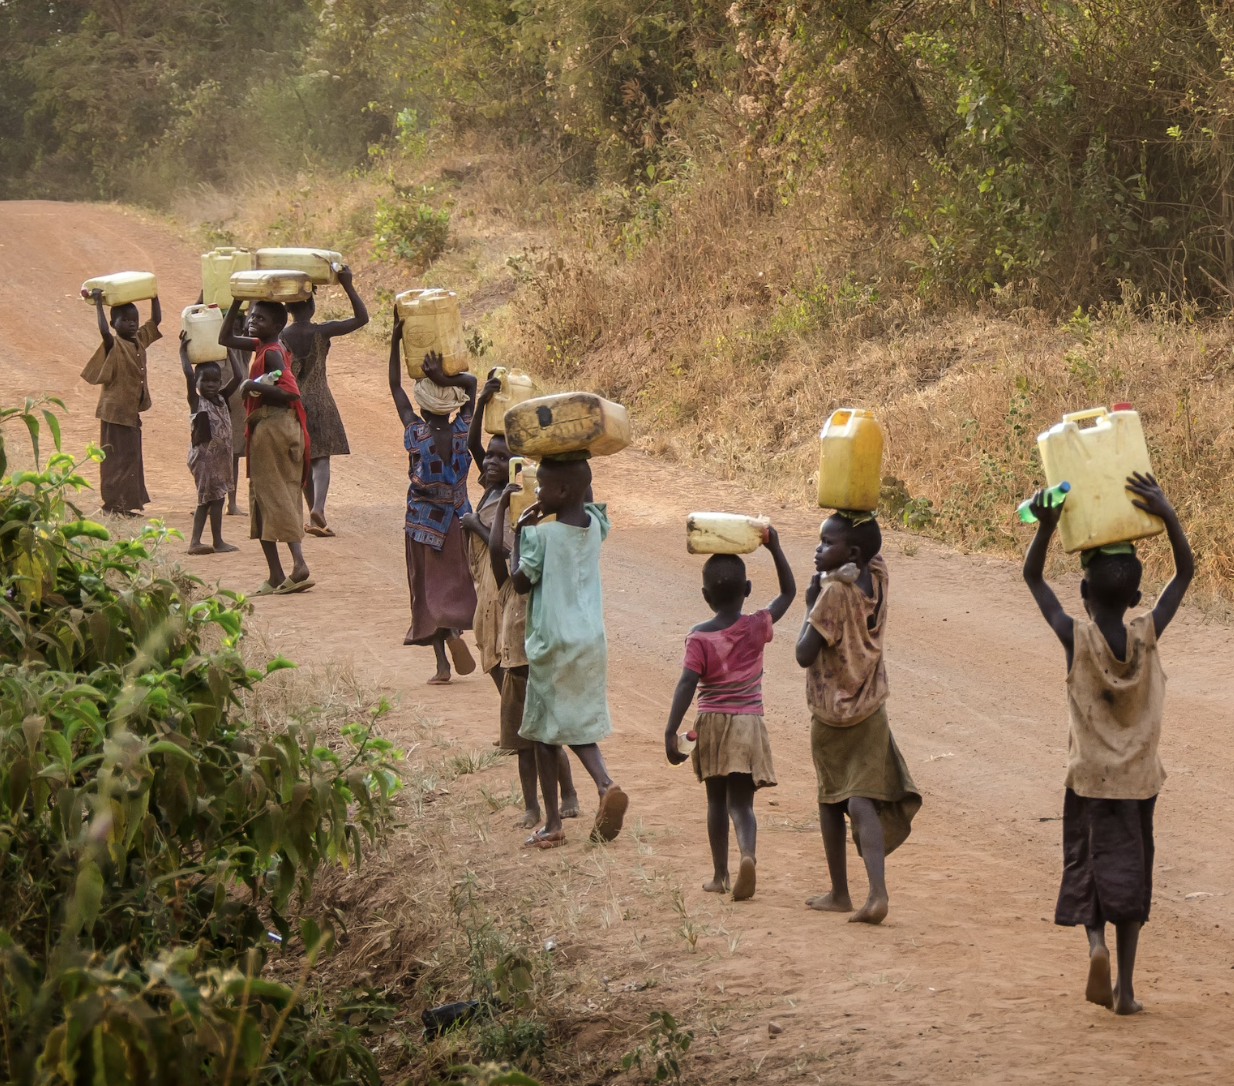 A group of children walking down a road carrying containers on their heads